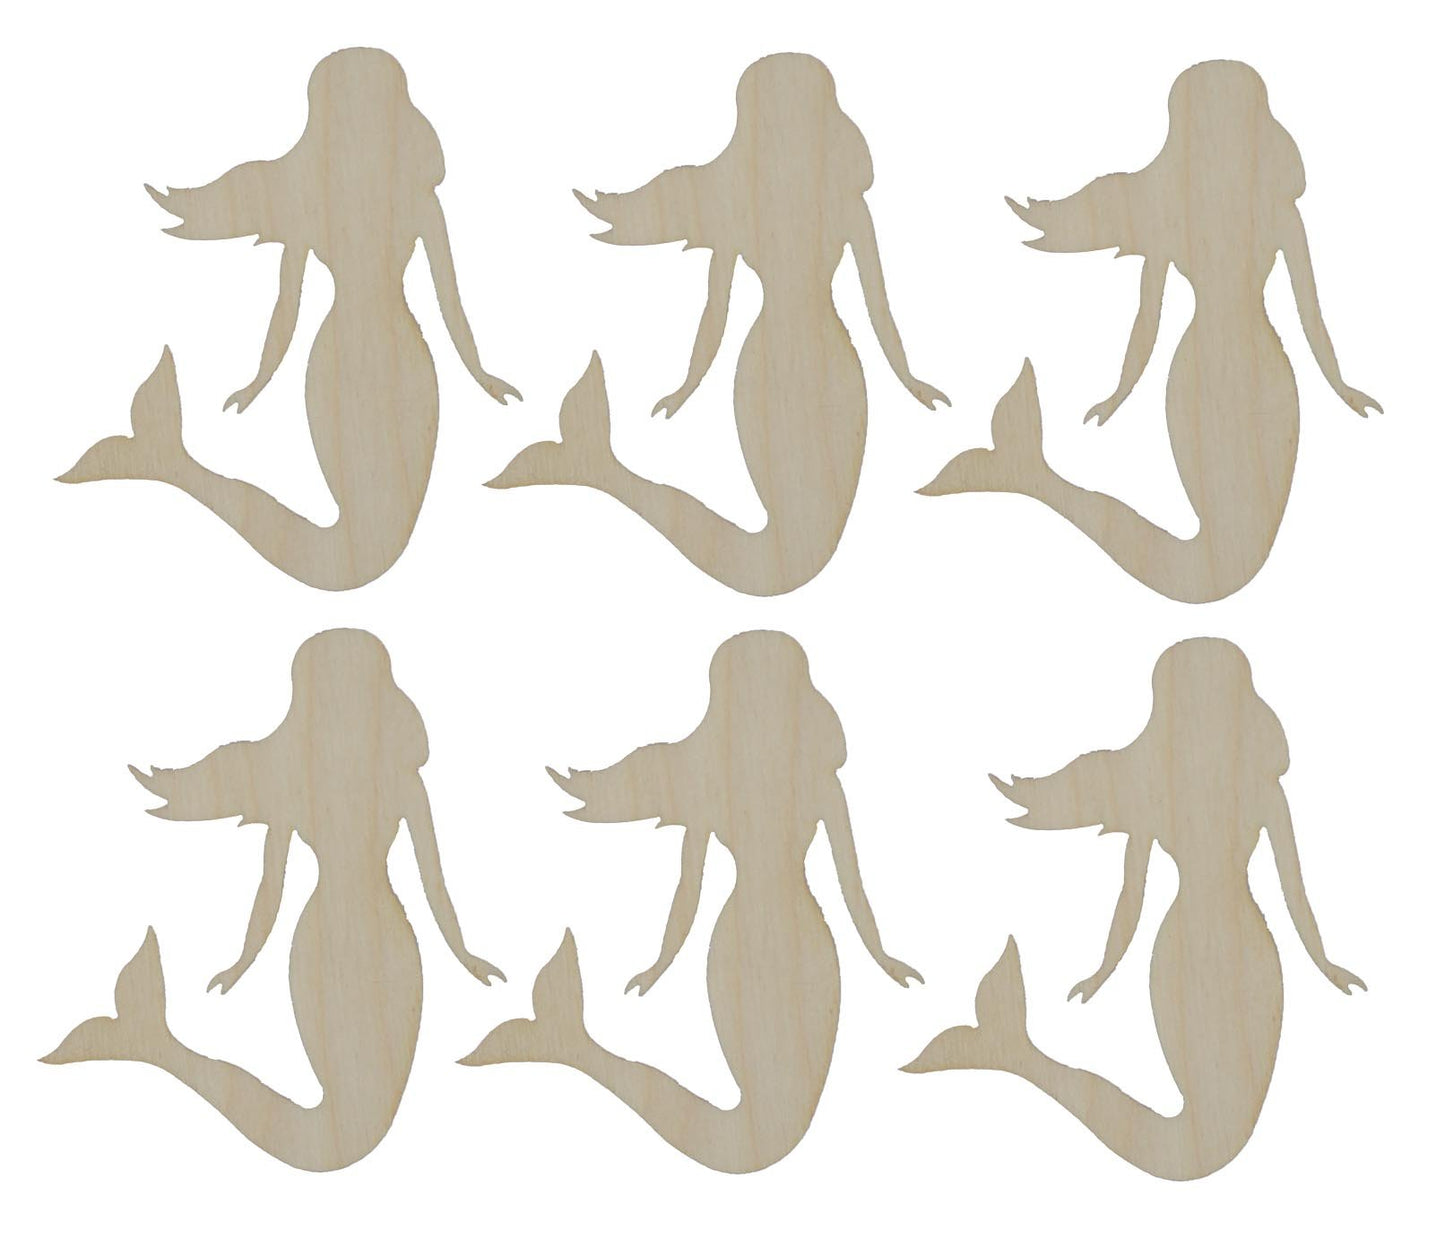 Mermaid Cut Outs Unfinished Wood Mini Mermaids 2.5" Inch 6 Pieces MER-06 C